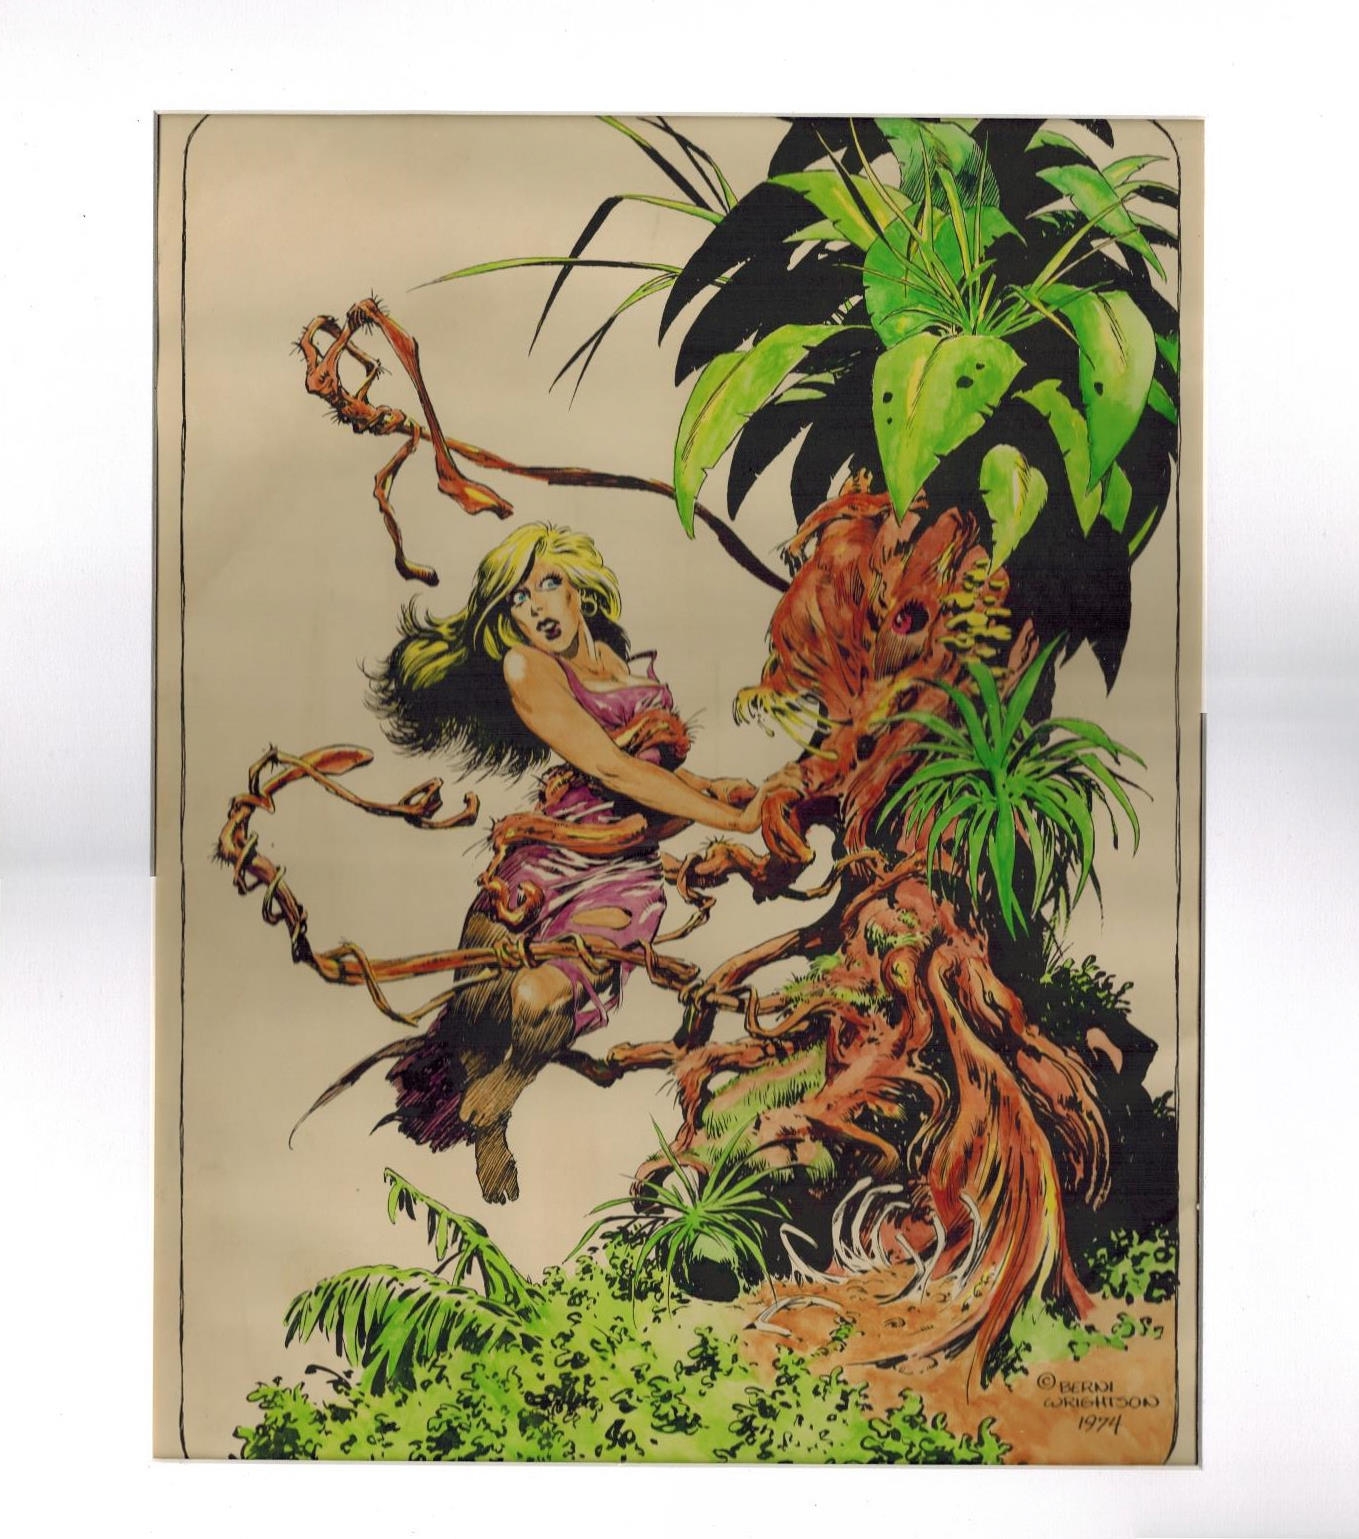 Berni Wrightson 1974 The Monsters Color The Creature Book Hand Colored Pinup Page Comic Art